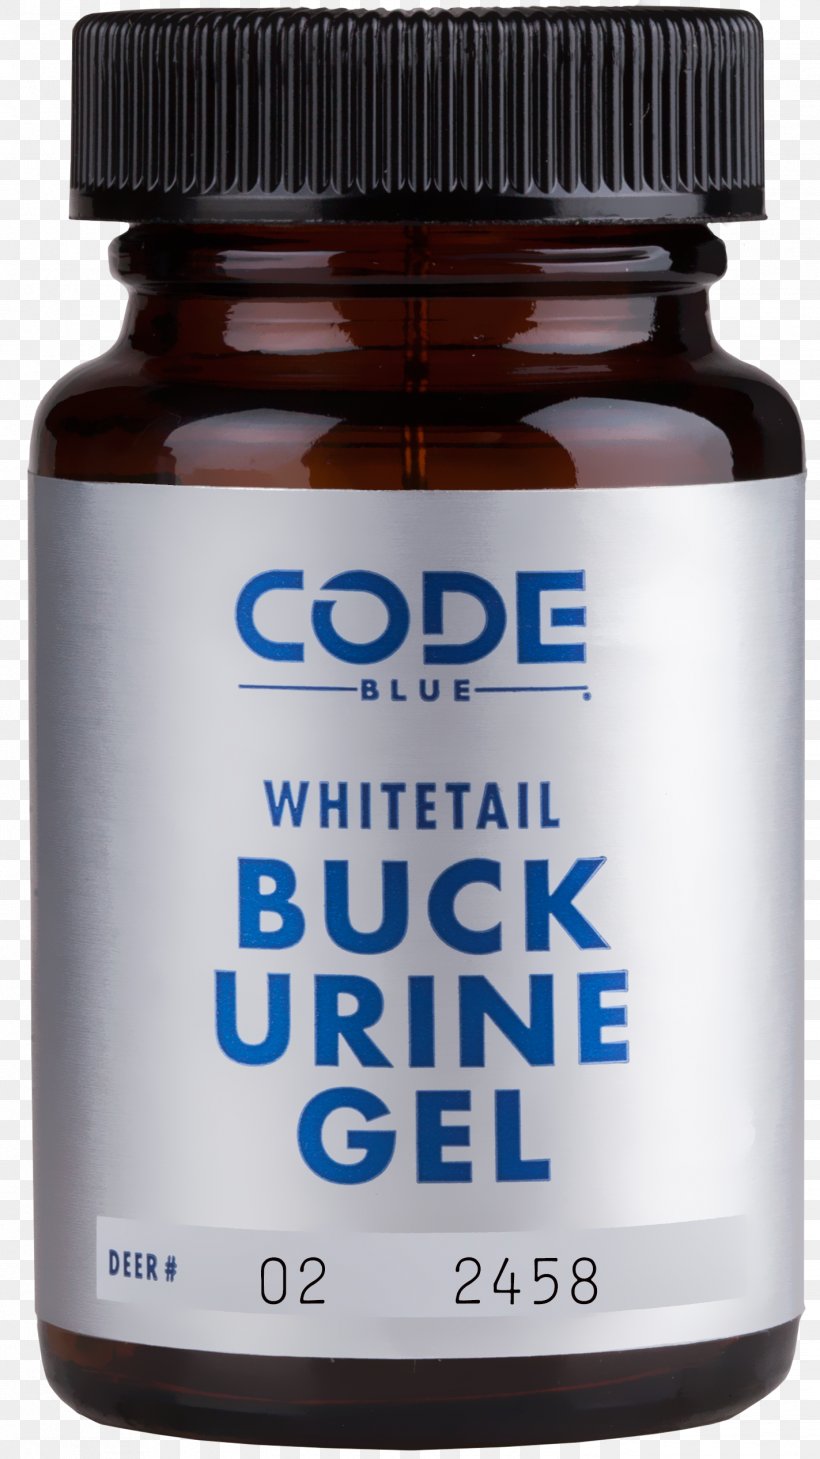 Code Blue Code Red Doe Urine Scent Code Blue Whitetail Doe Urine CODE BLUE WHITETAIL TARSAL GLAND GEL Product Ounce, PNG, 1423x2533px, Ounce, Gel, Gland, Liquid, Liquidm Download Free